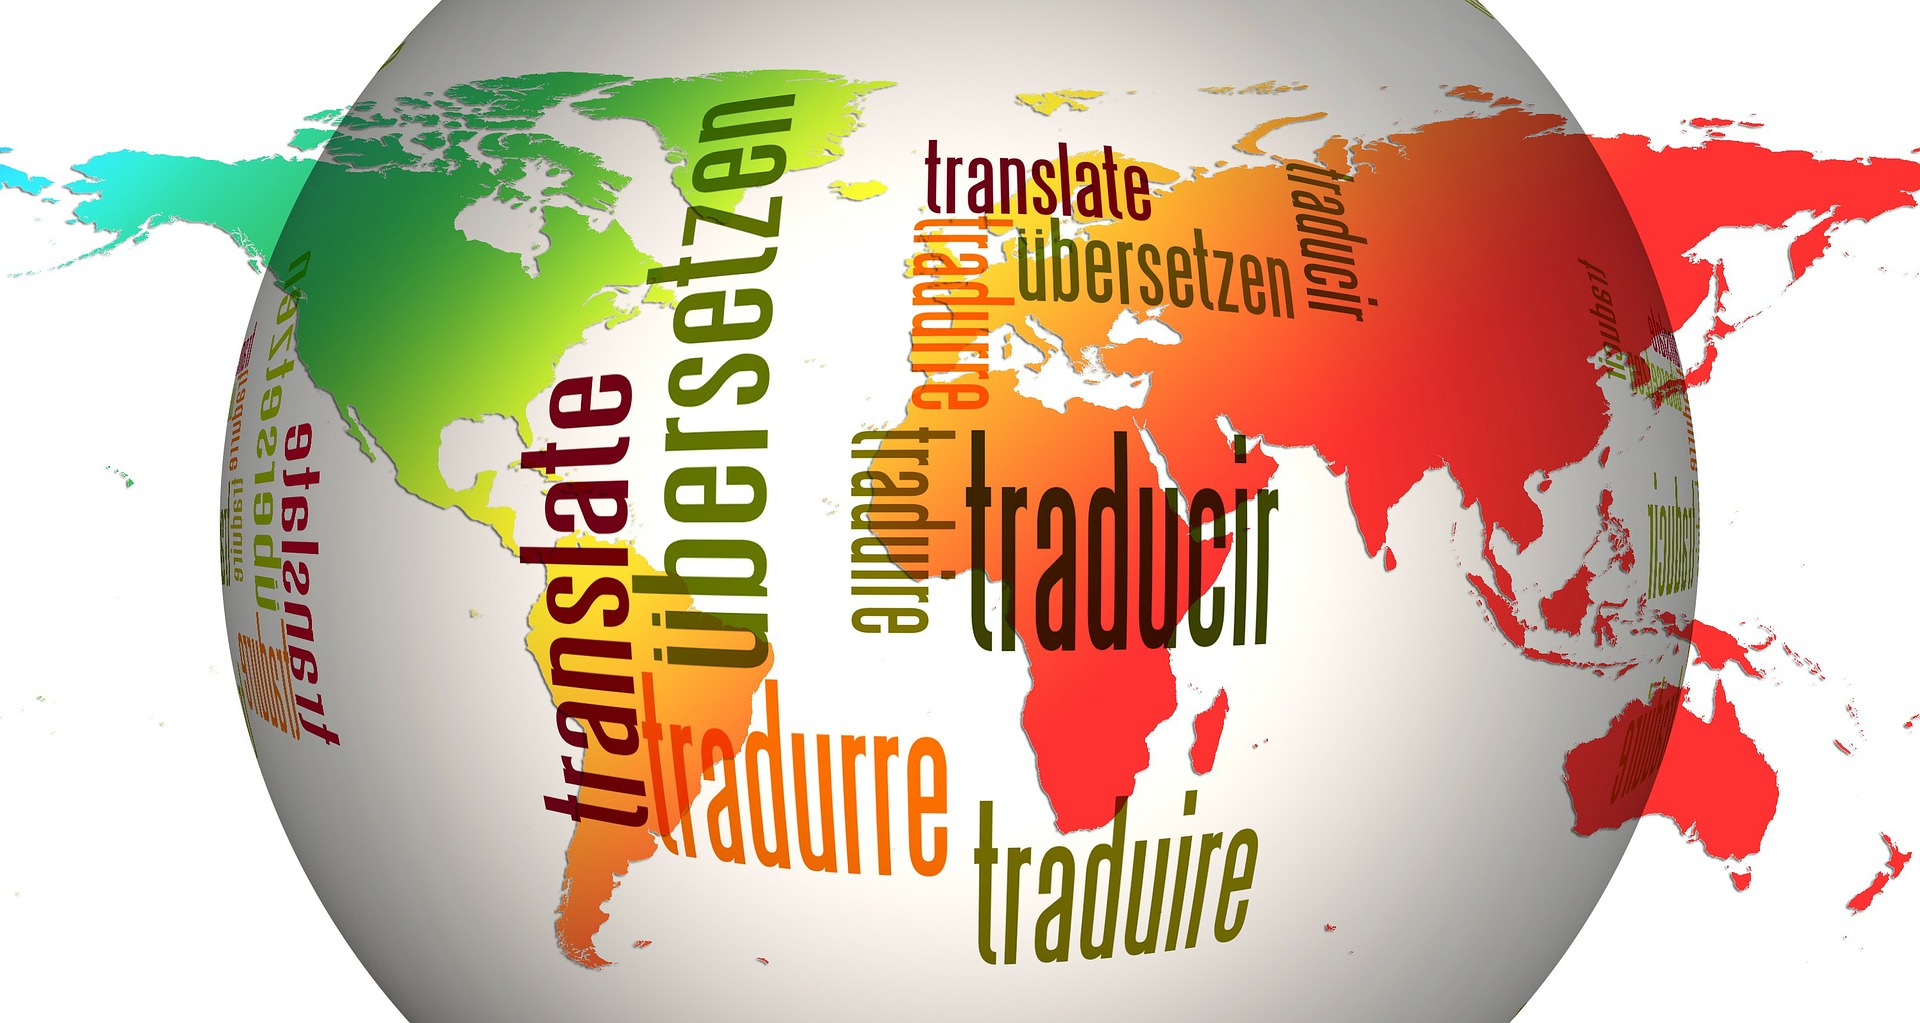 A map of the world with the word "translation" in different languages placed all over the map.